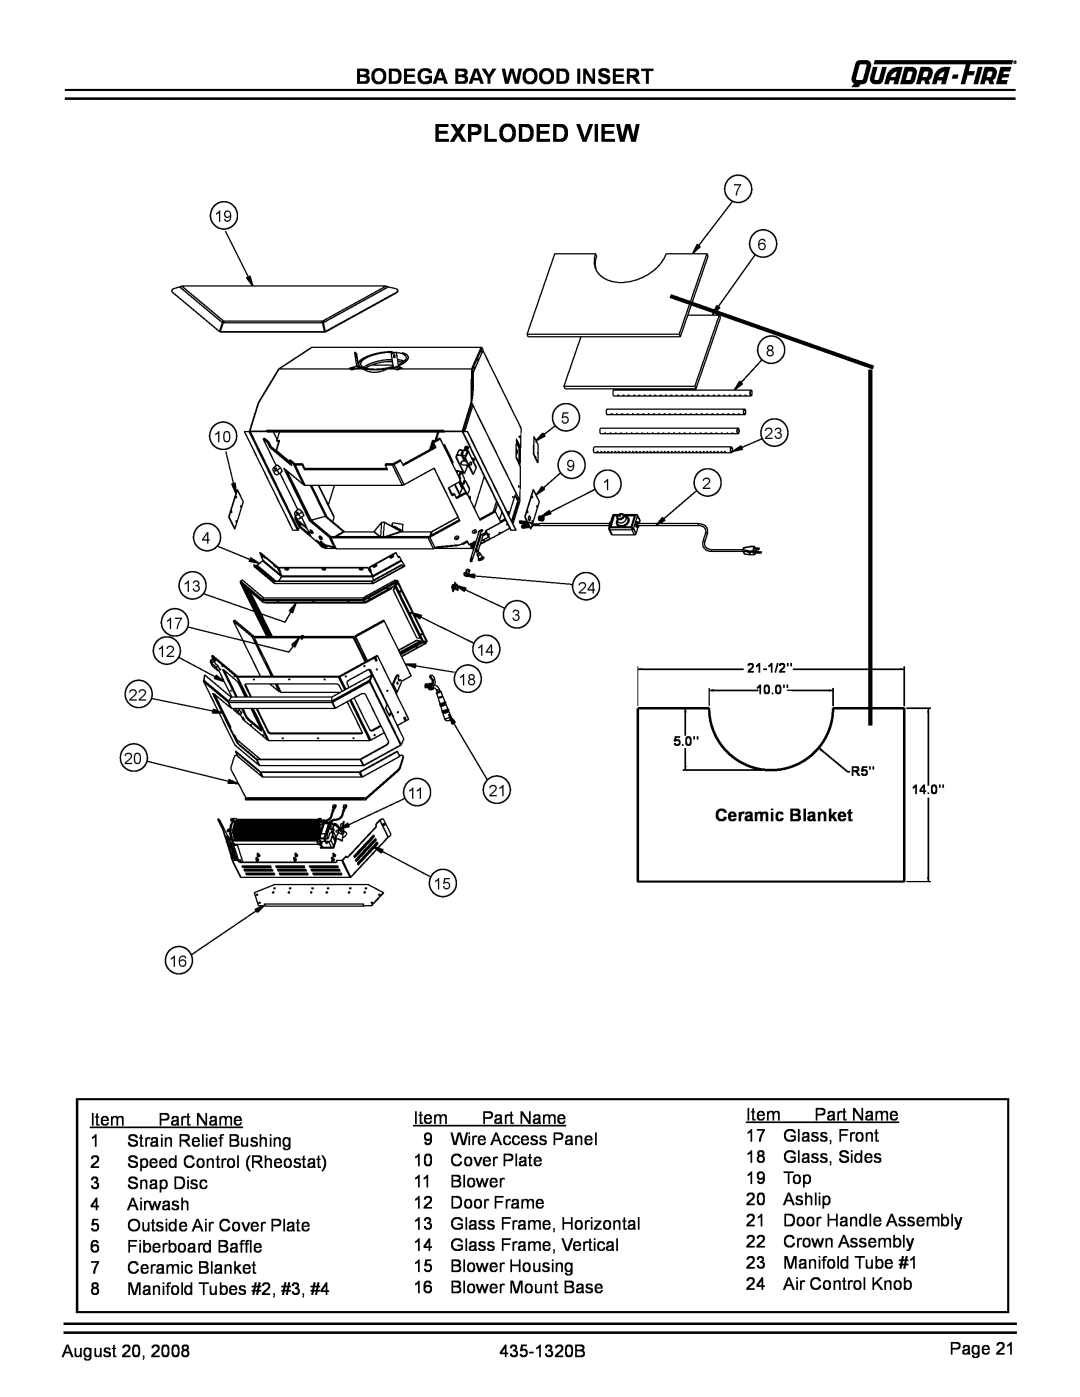 Hearth and Home Technologies BODBAY installation instructions Exploded View, Bodega Bay Wood Insert, Ceramic Blanket 